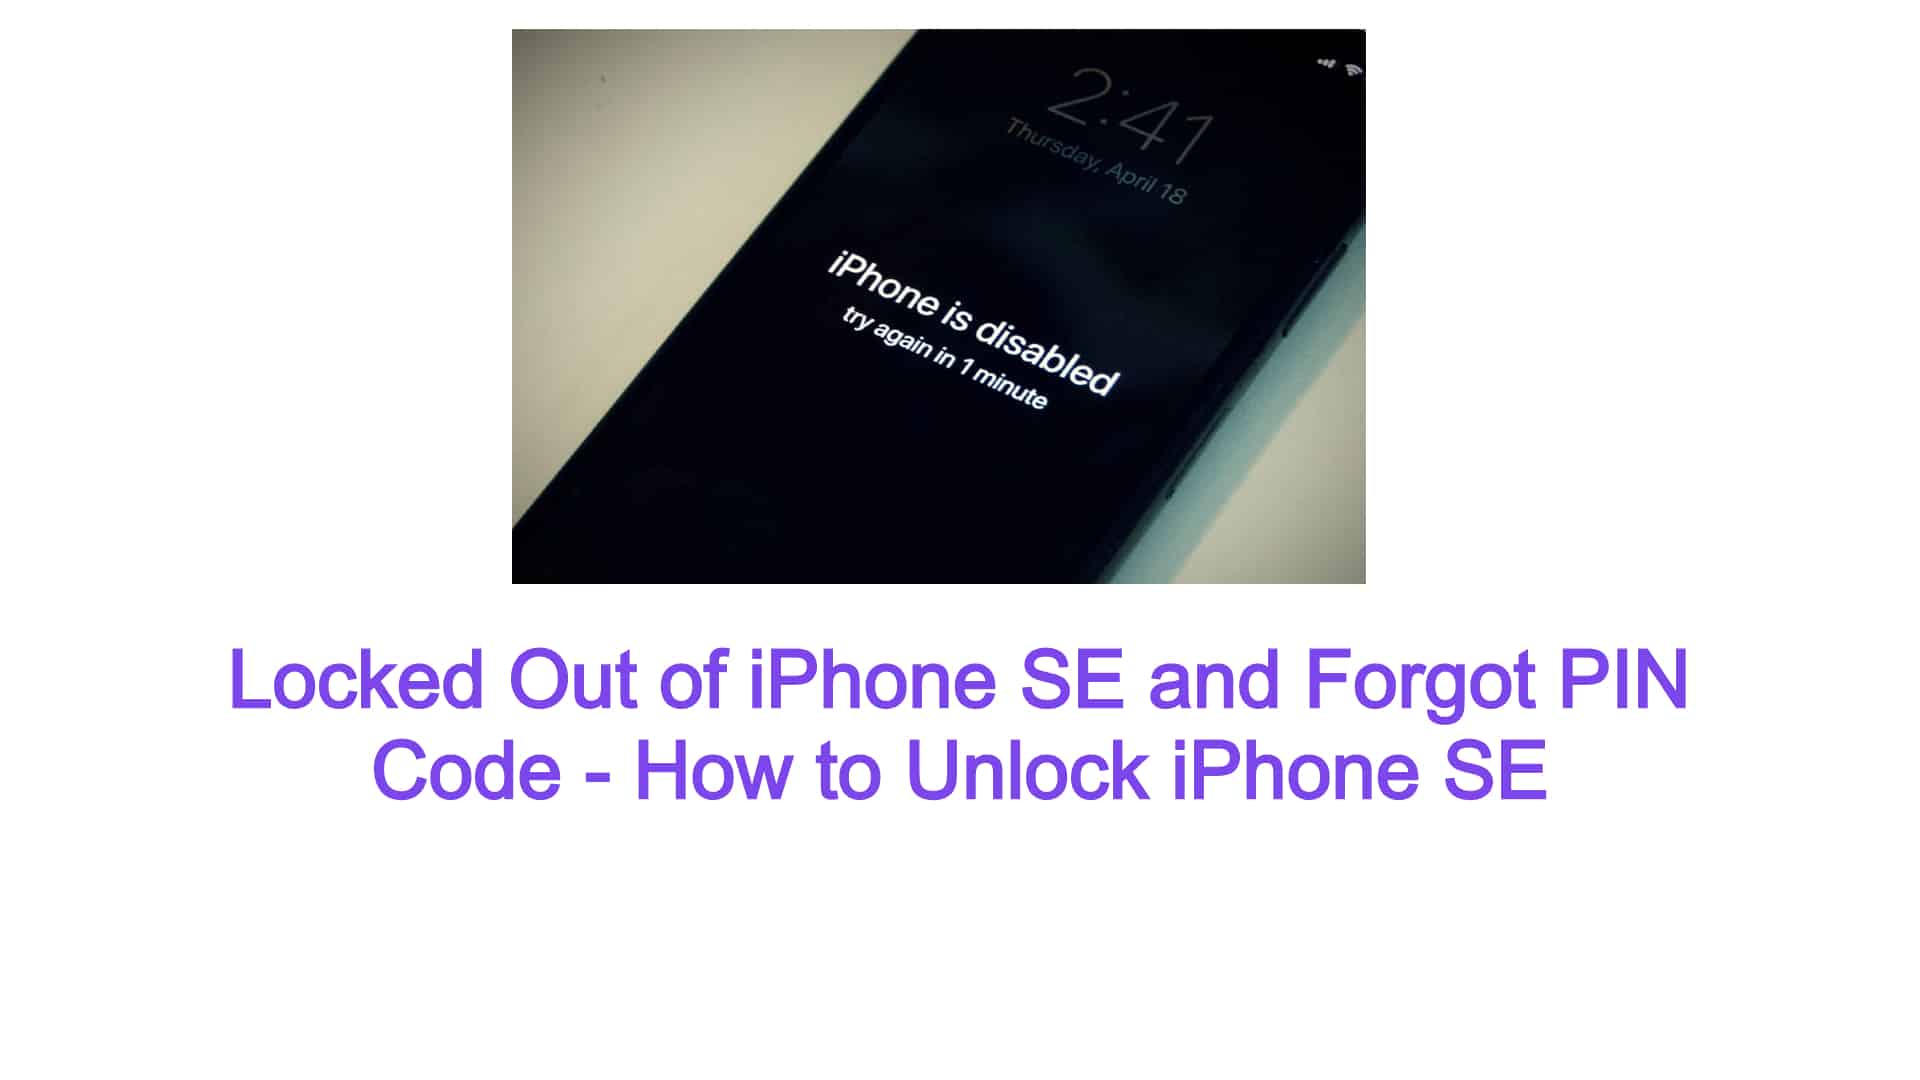 Locked Out of iPhone SE and Forgot PIN Code - How to Unlock iPhone SE